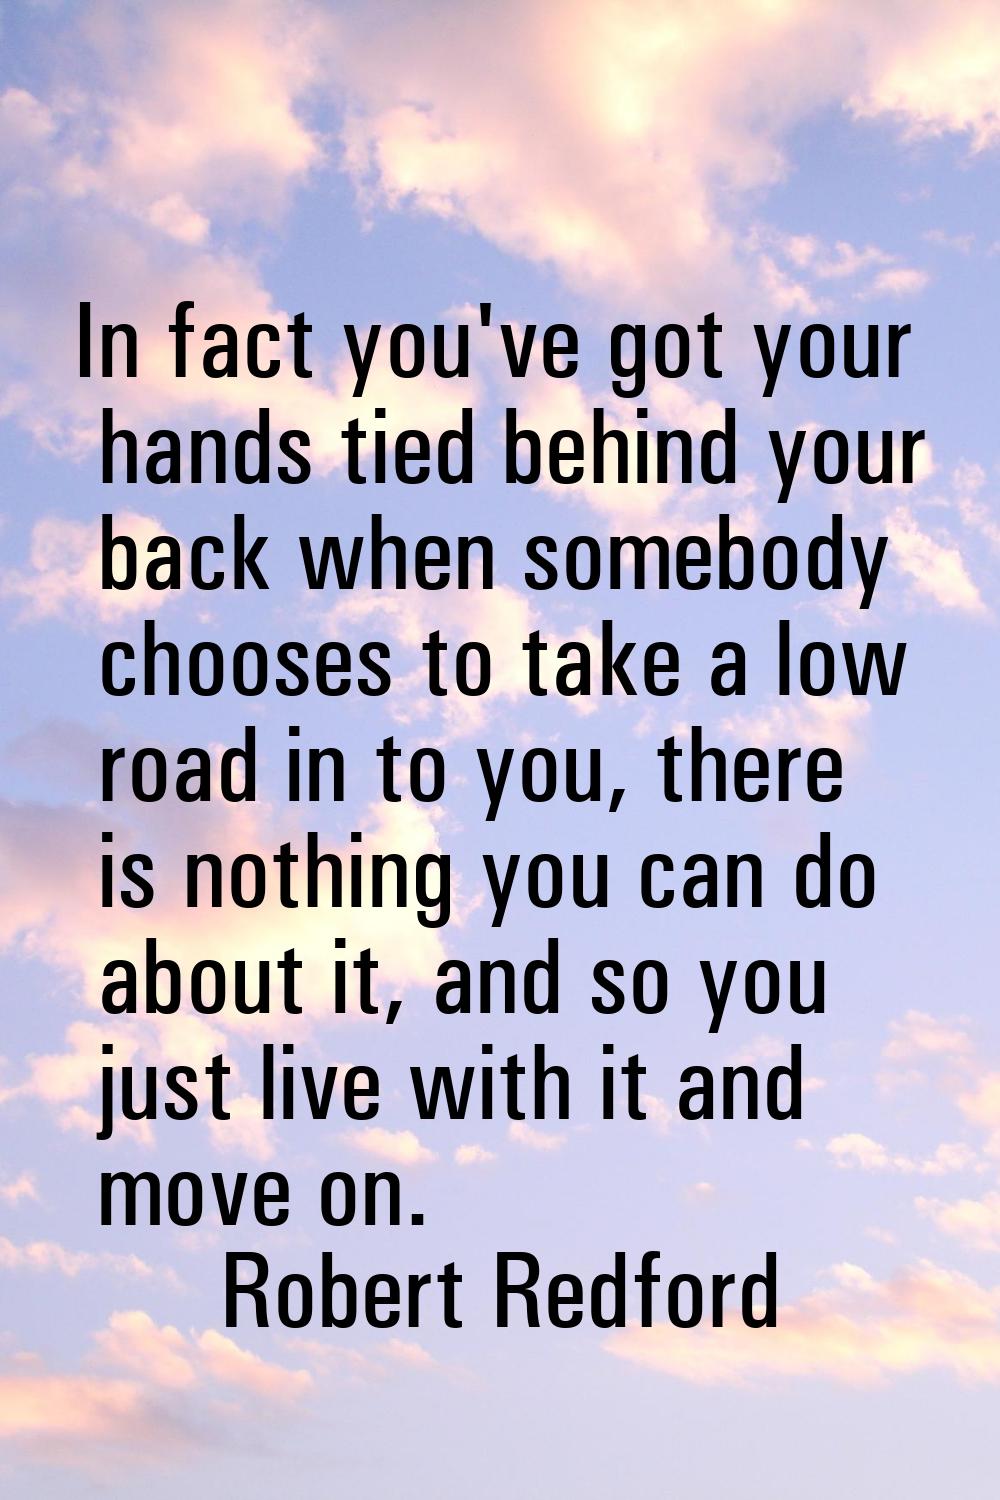 In fact you've got your hands tied behind your back when somebody chooses to take a low road in to 